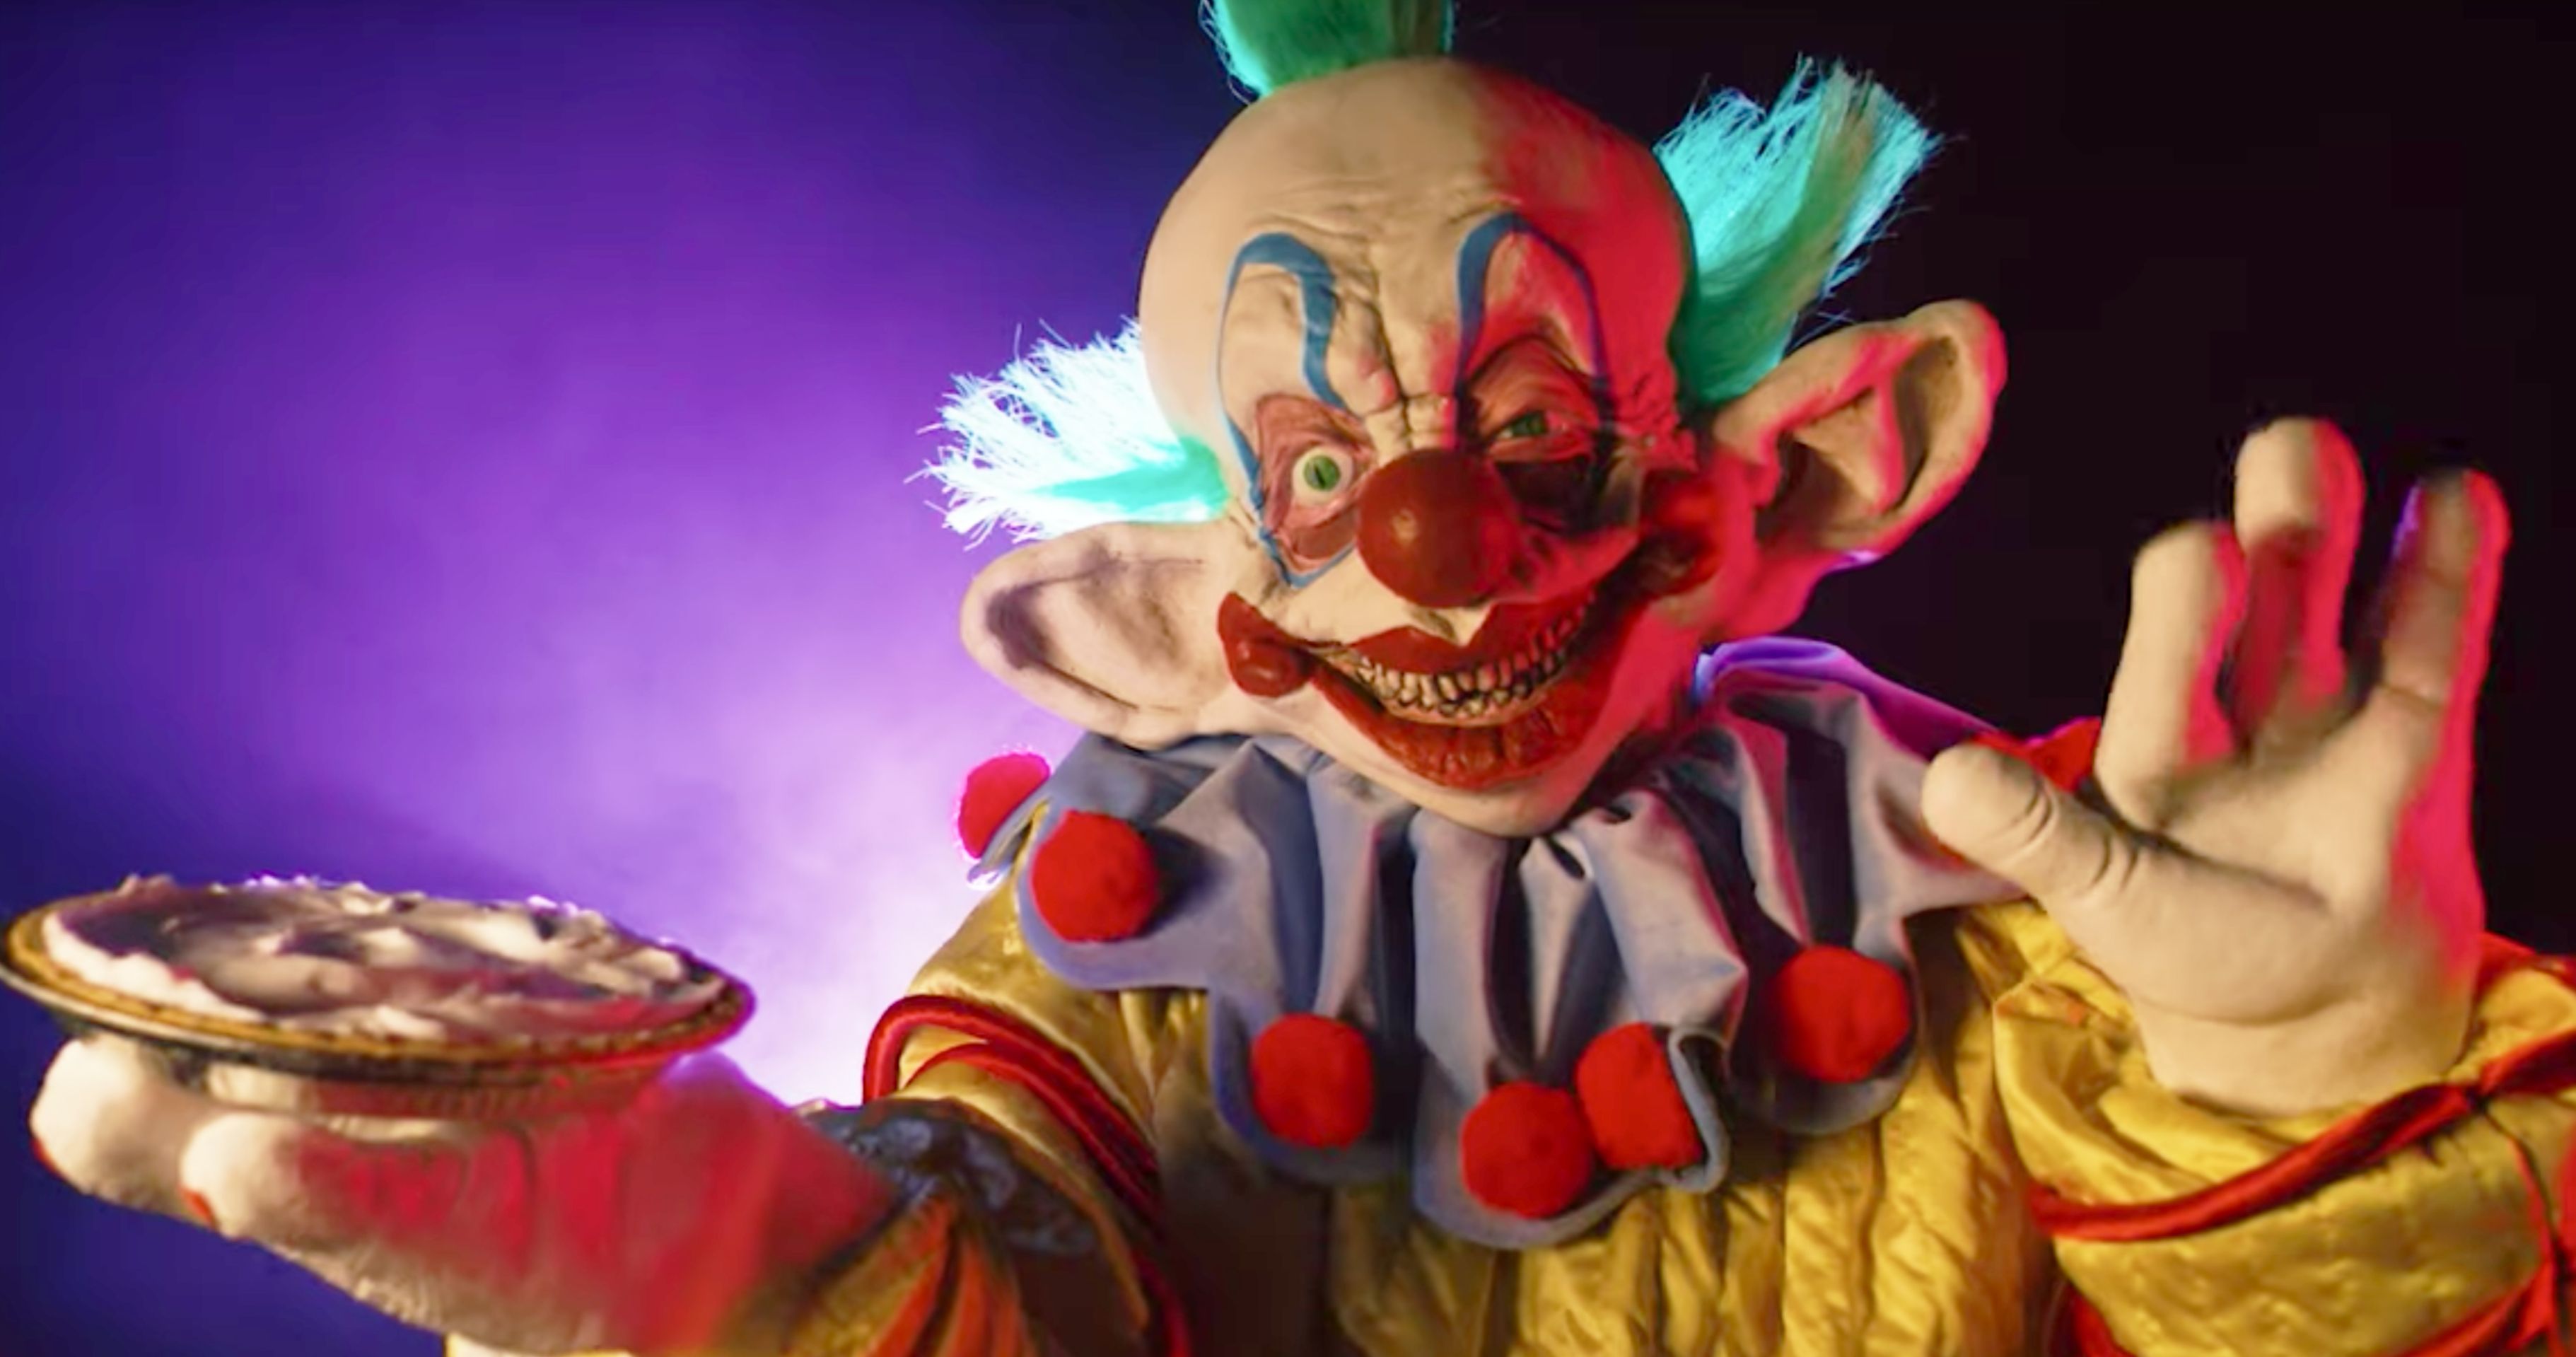 Killer Klowns from Outer Space Maze Lands at Halloween Horror Nights Hollywood This Year